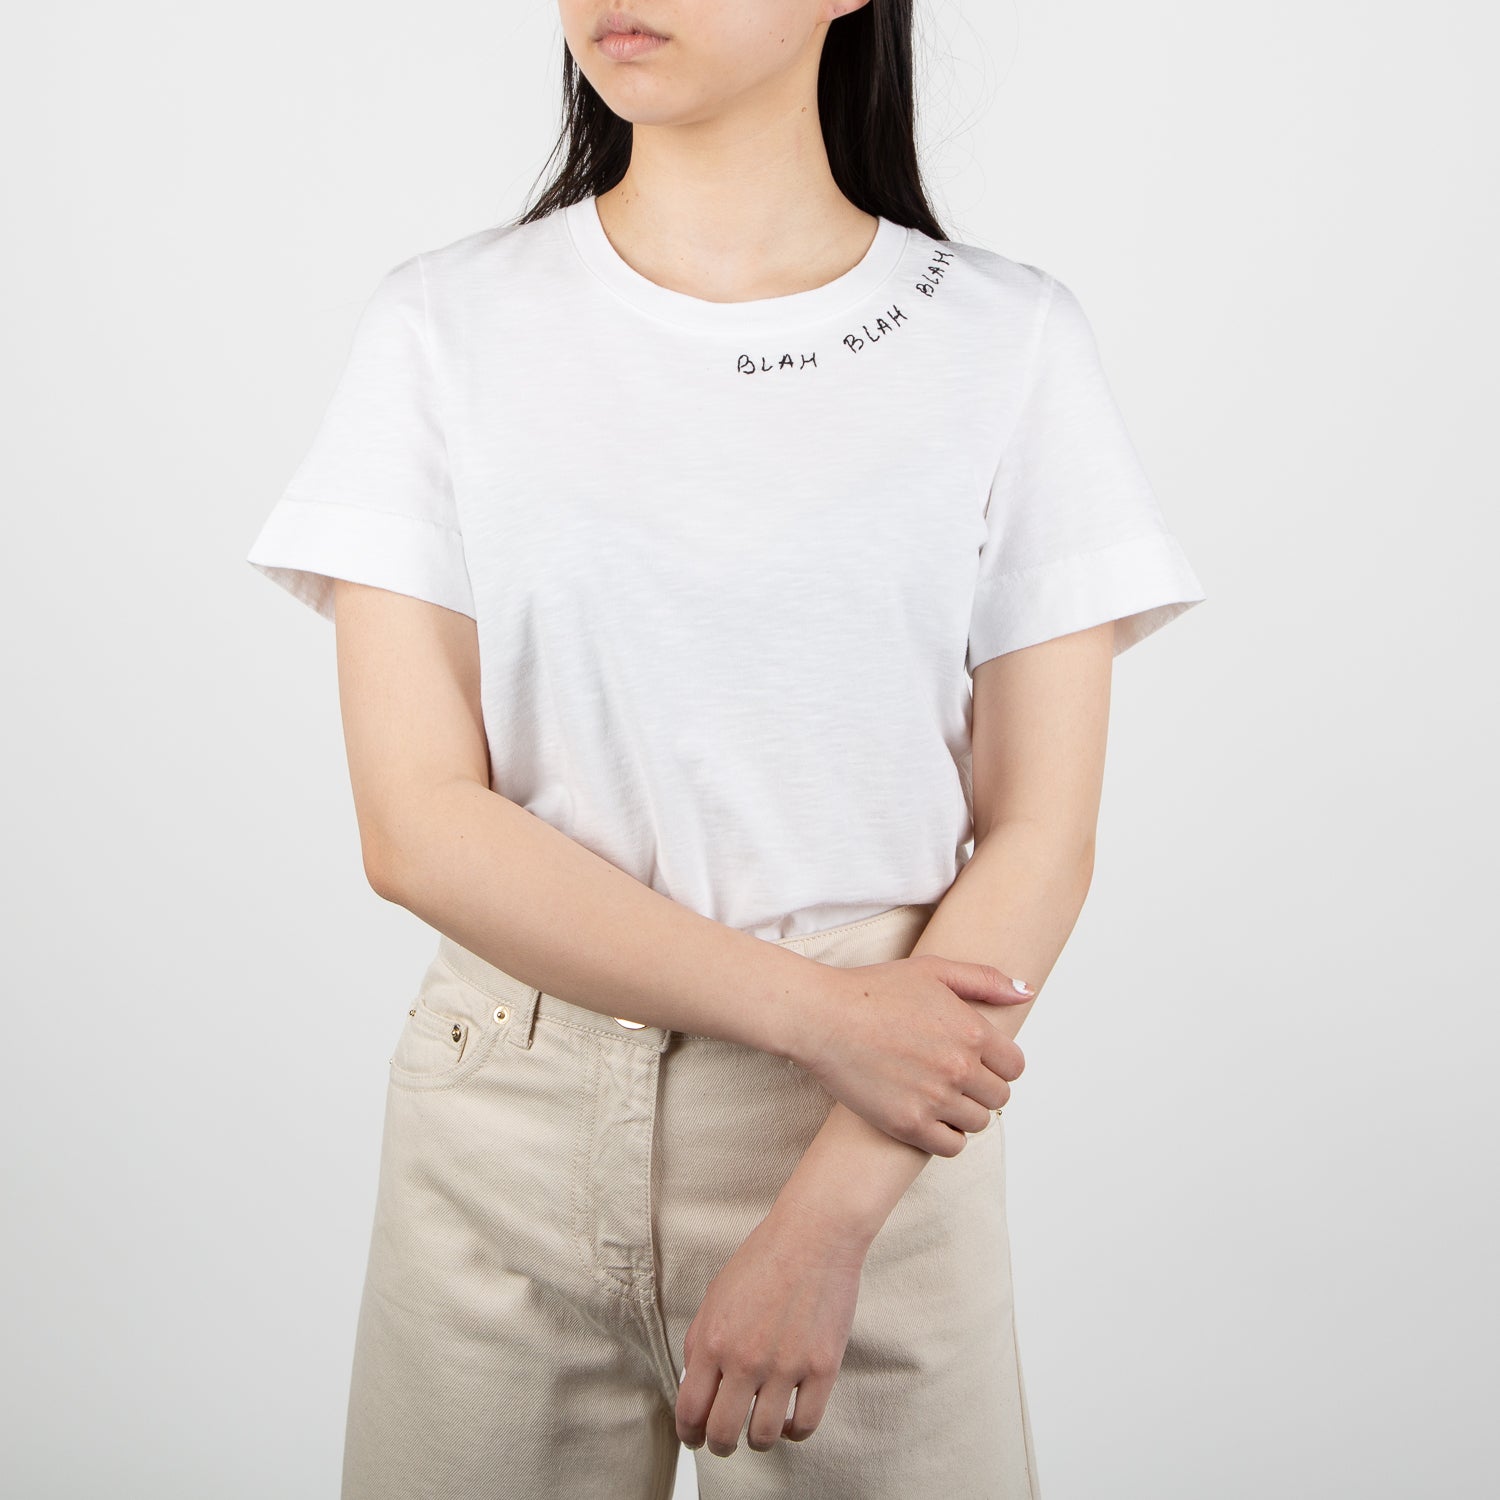 woven white cotton shirt with phrase by Secret Location